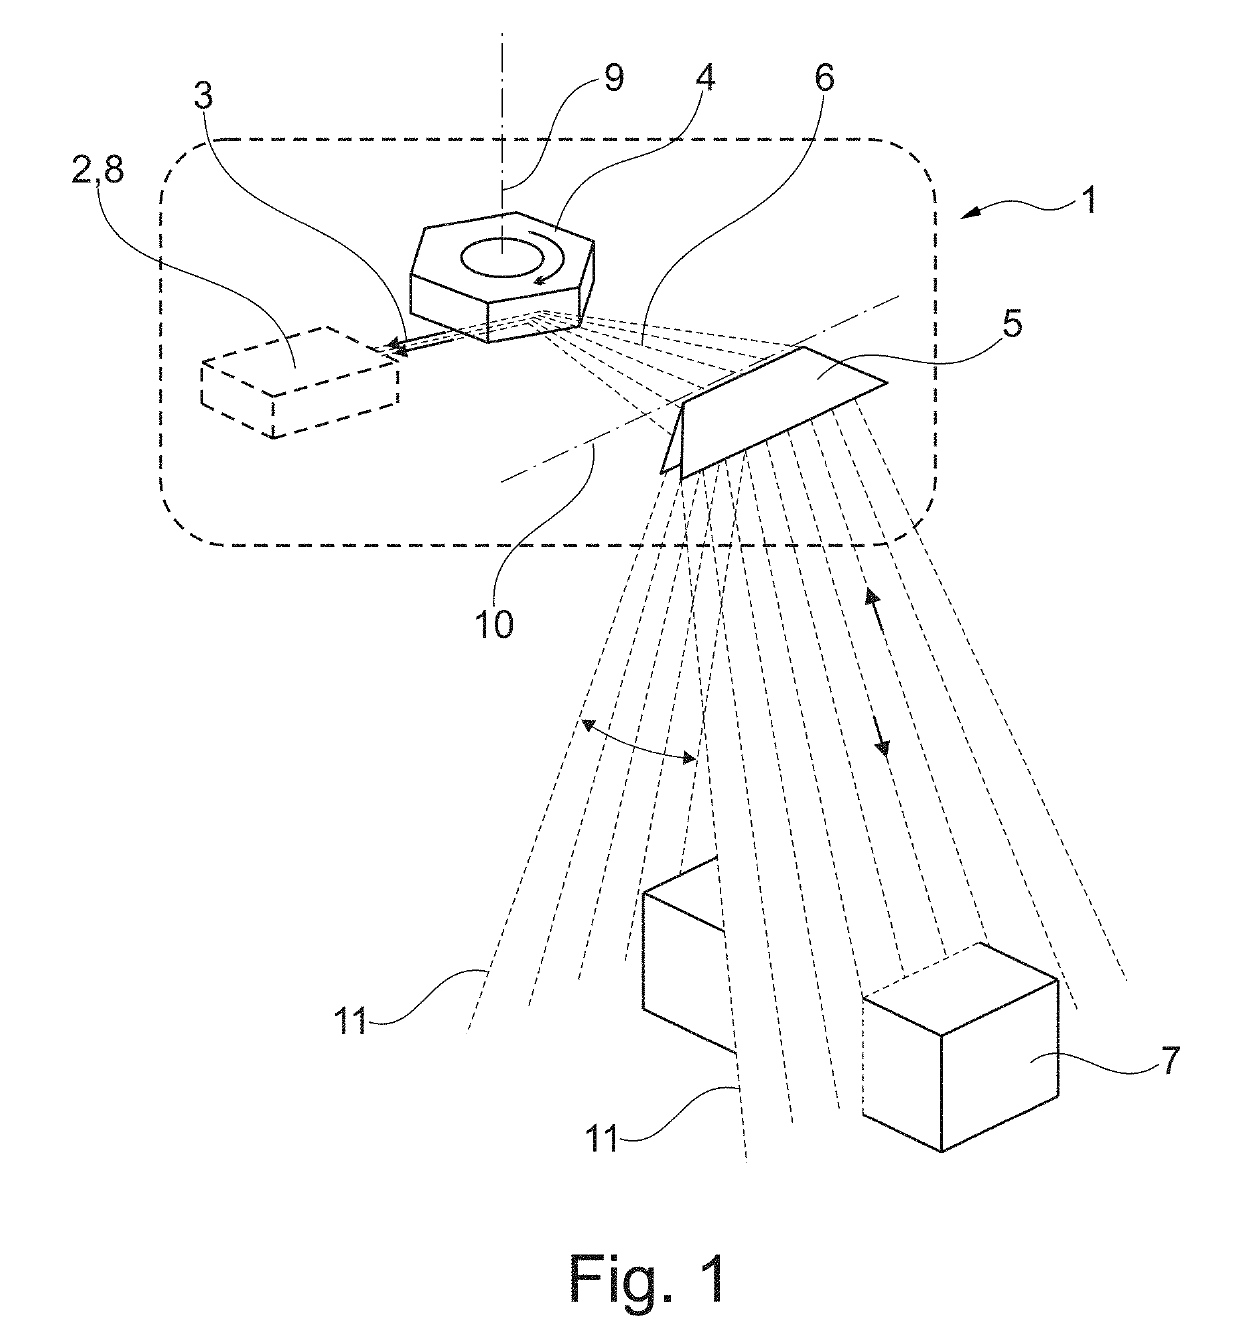 Method of imaging an object for tracking and documentation in transportation and storage